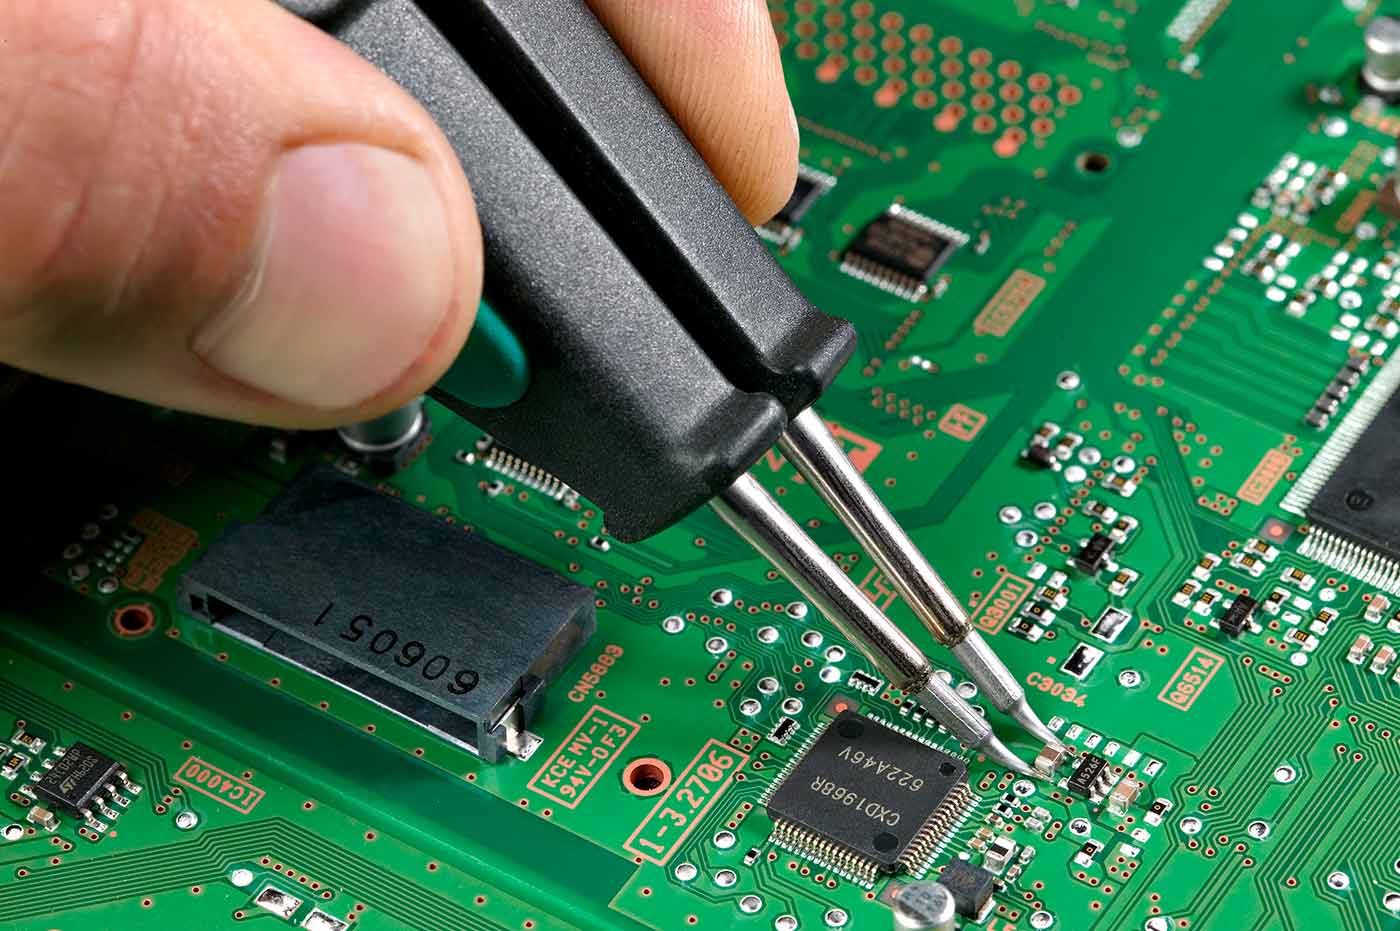 Soldering of a 1210 capacitor using no flux.